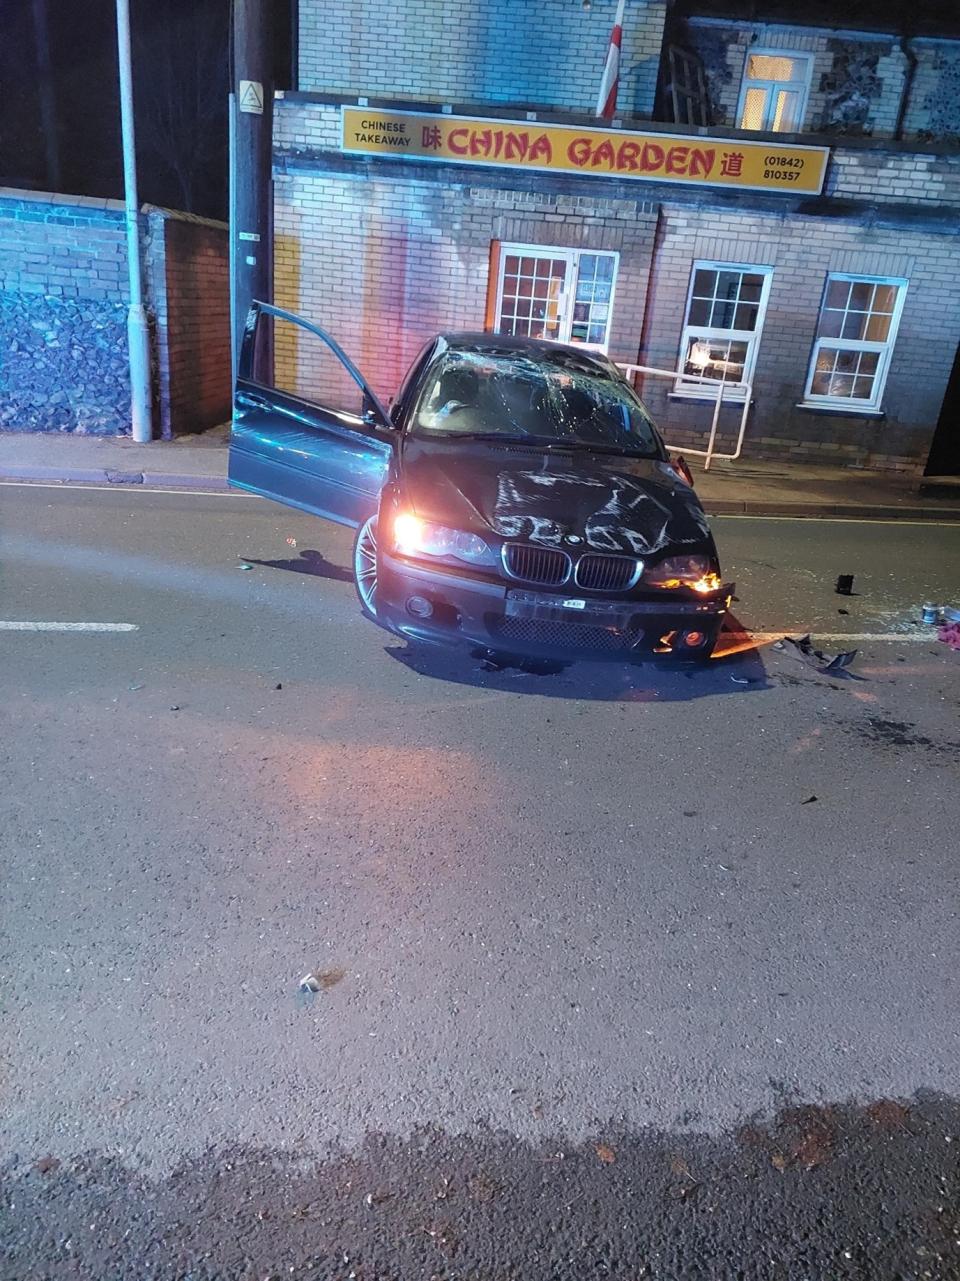 The driver of the car was found to be three times the drink-drive limit, police said. (Twitter/Mildenhall Police)